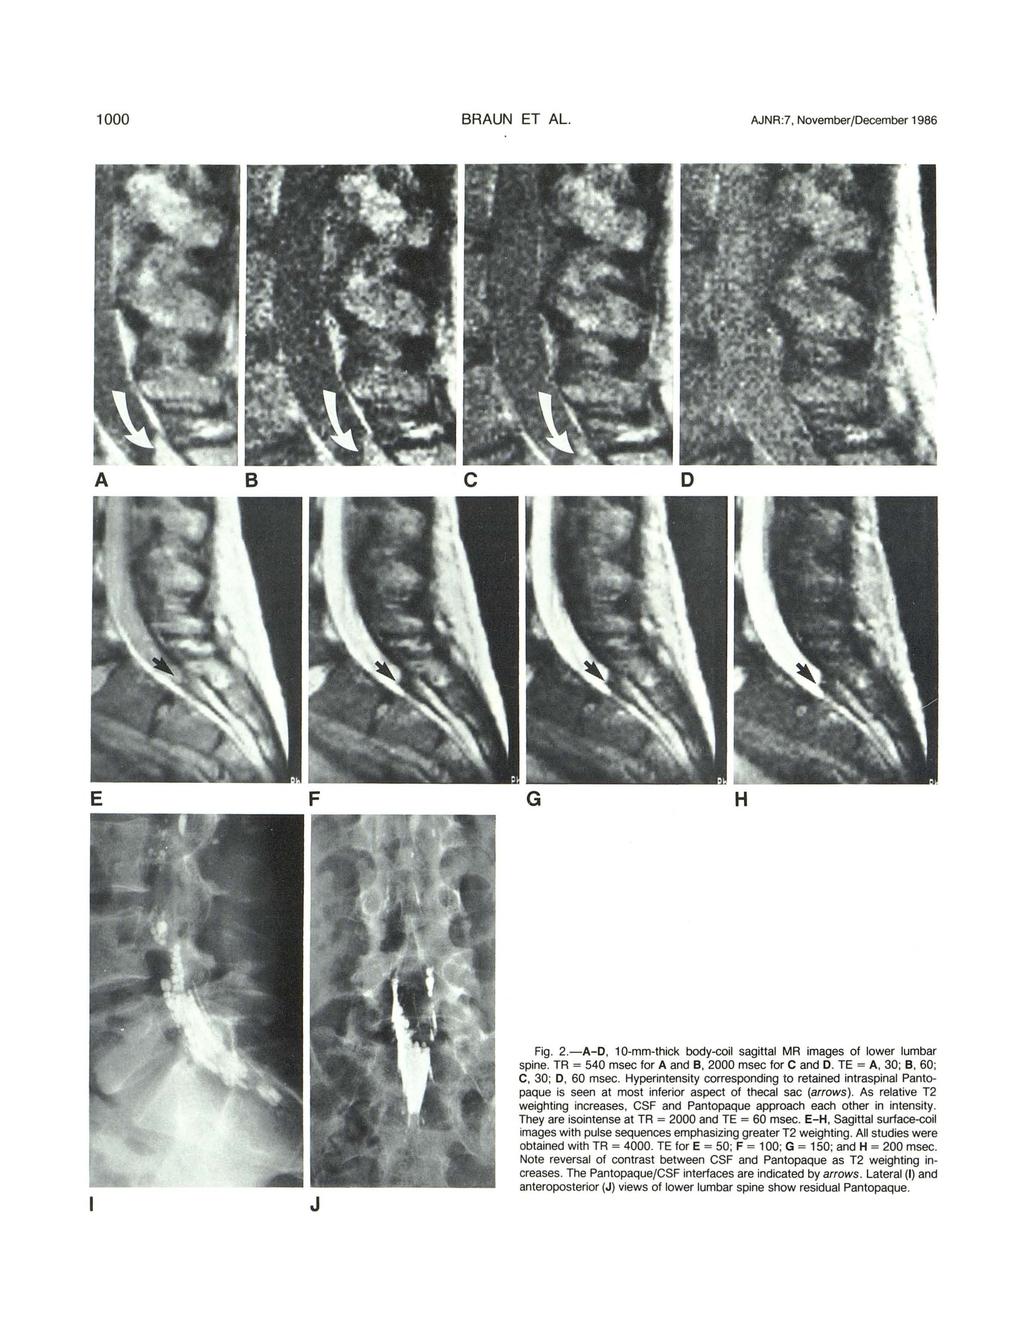 1000 BRAUN ET AL. AJNR : 7, November/December 1986 A B c o E F G H J Fig. 2.-A-D, 10-mm-thick body-coil sagittal MR images of lower lumbar spine. TR = 540 msec for A and e, 2000 msec for C and D.